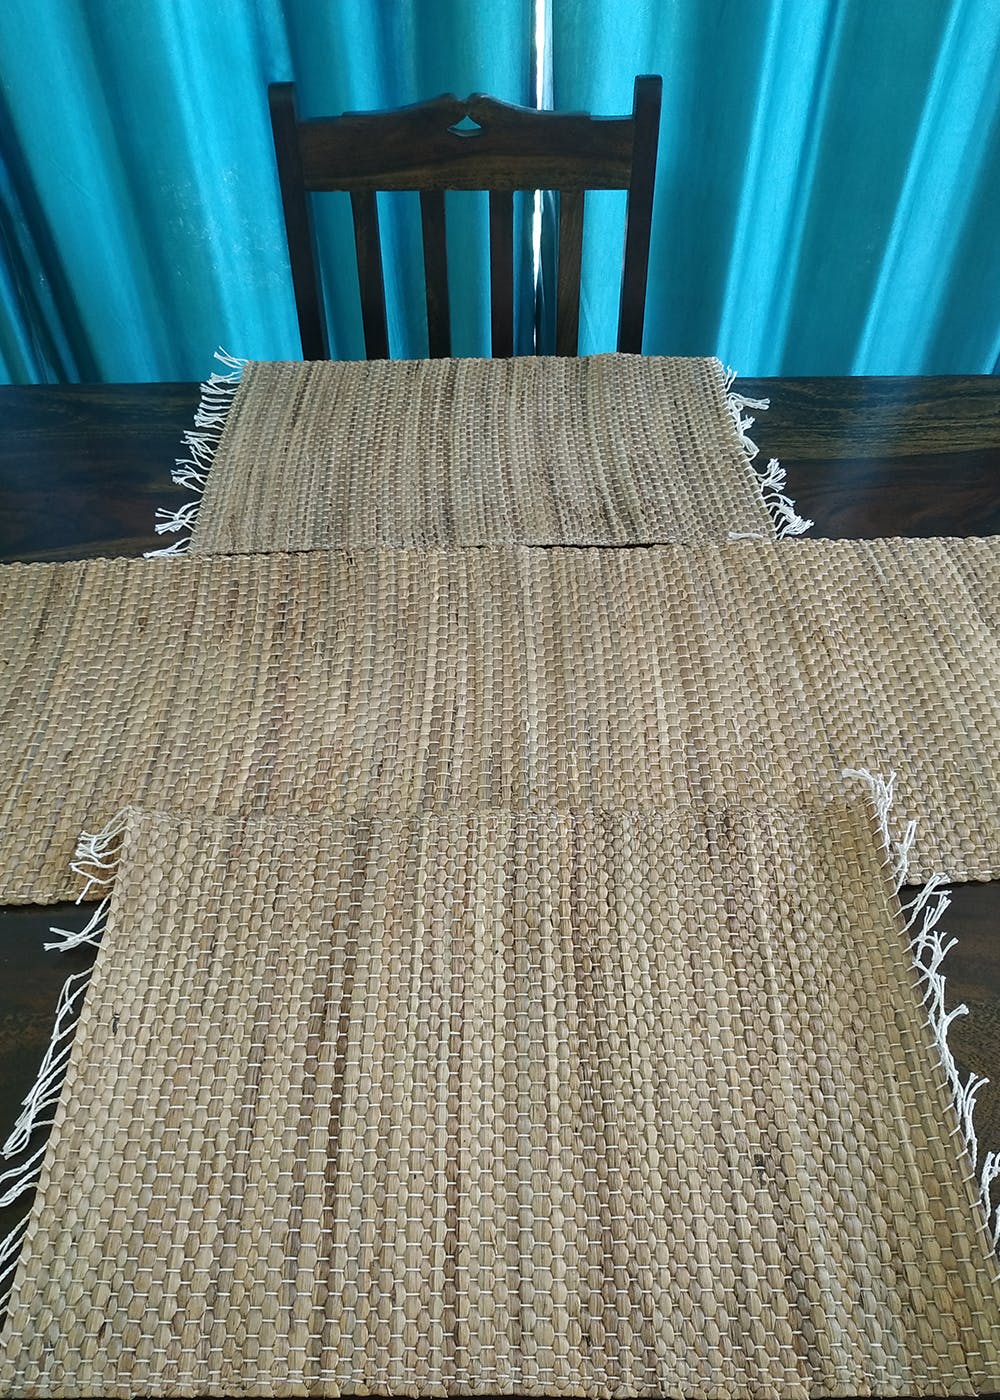 Table Placemats With Runner - Brown